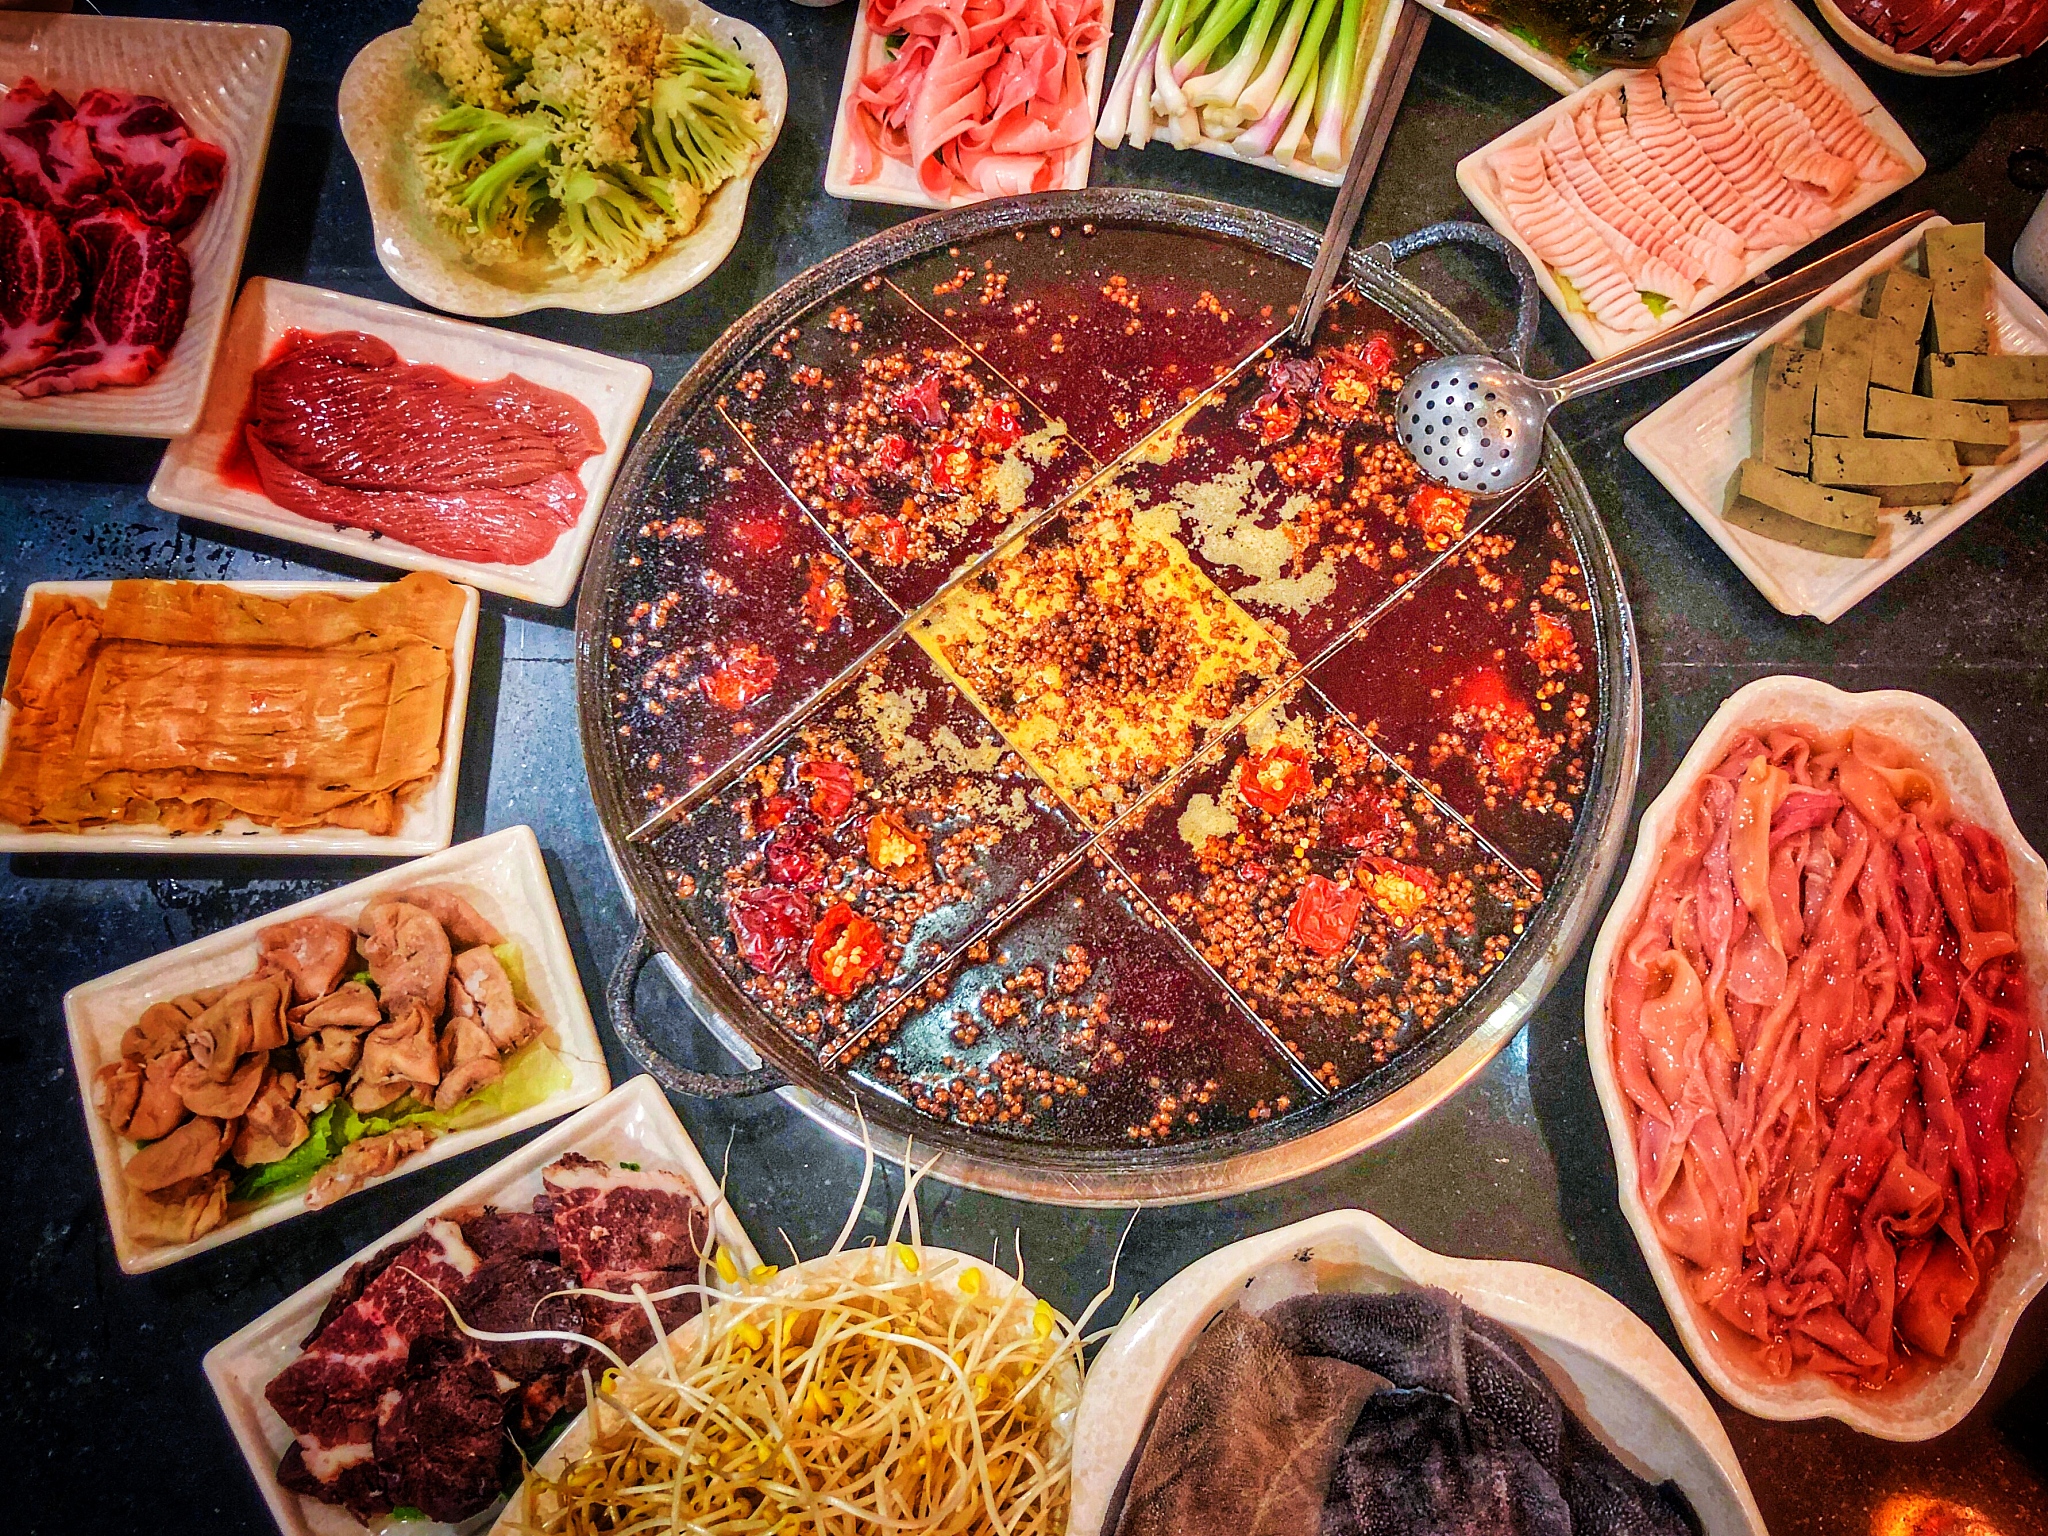 Being a foodie in southwest China's Chongqing